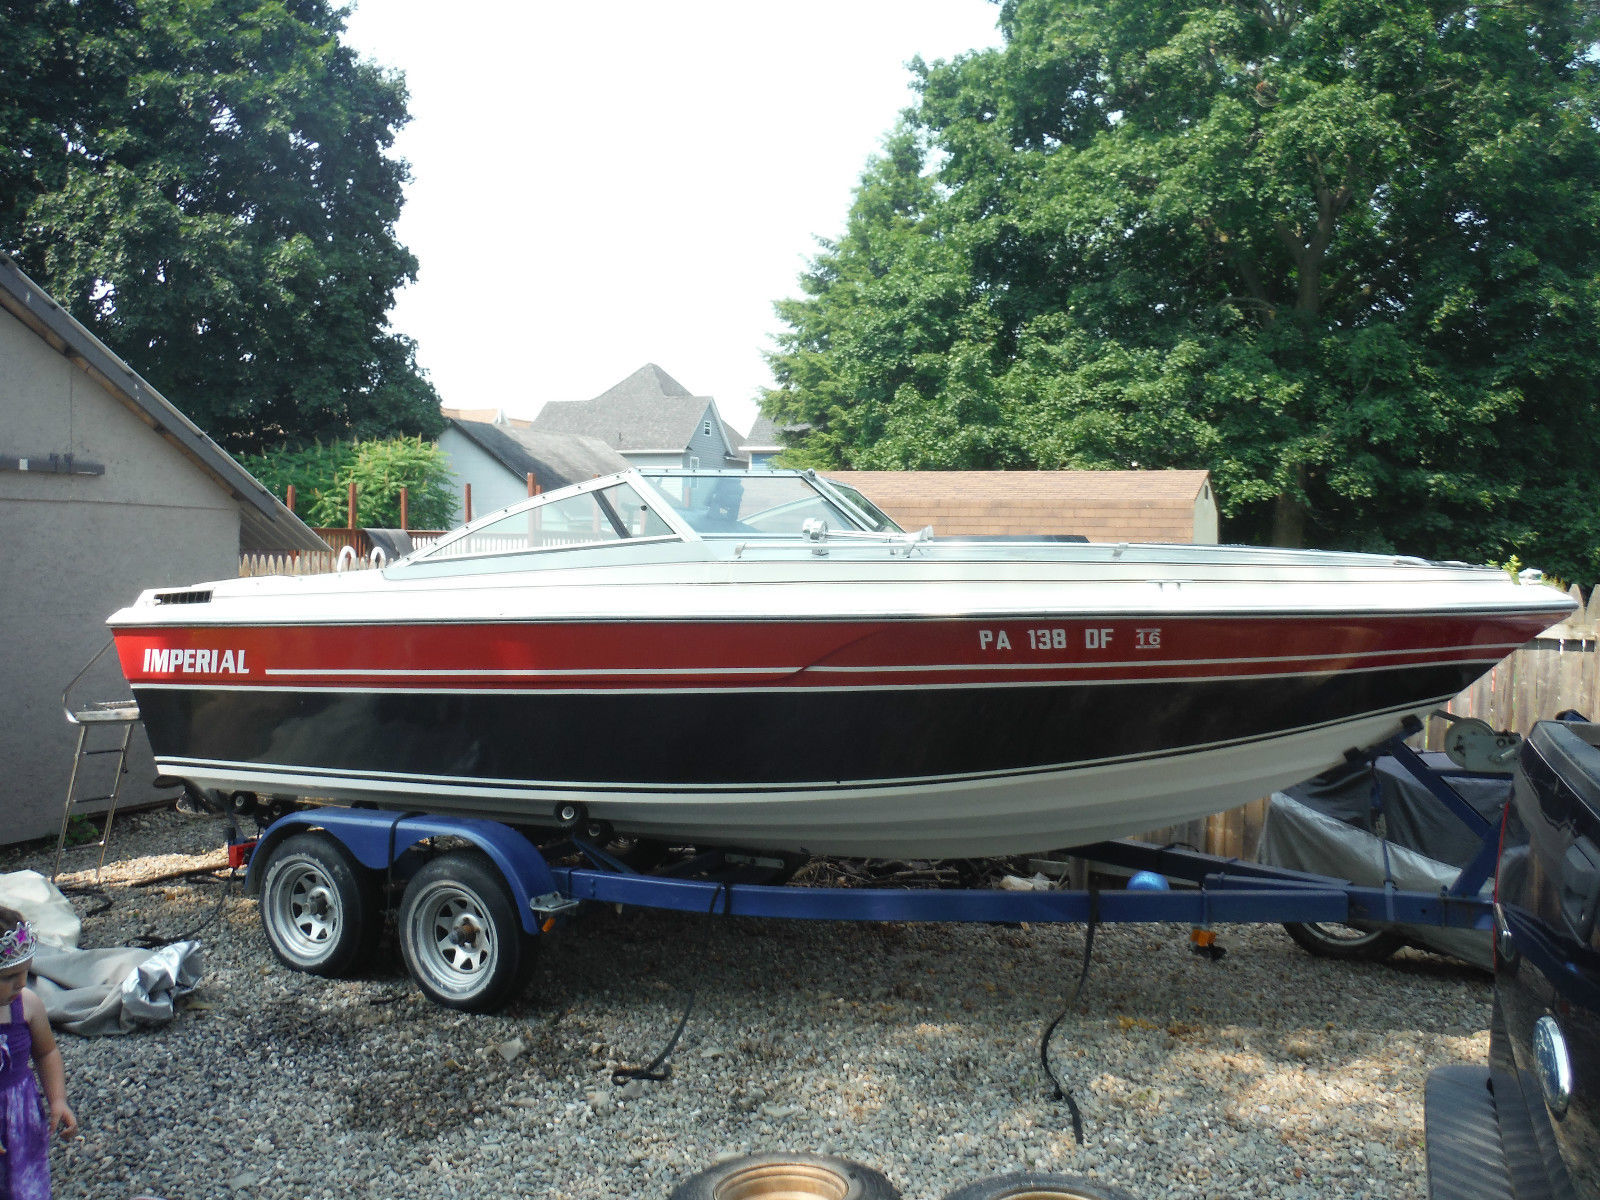 Imperial 210xs 1985 for sale for 4,500